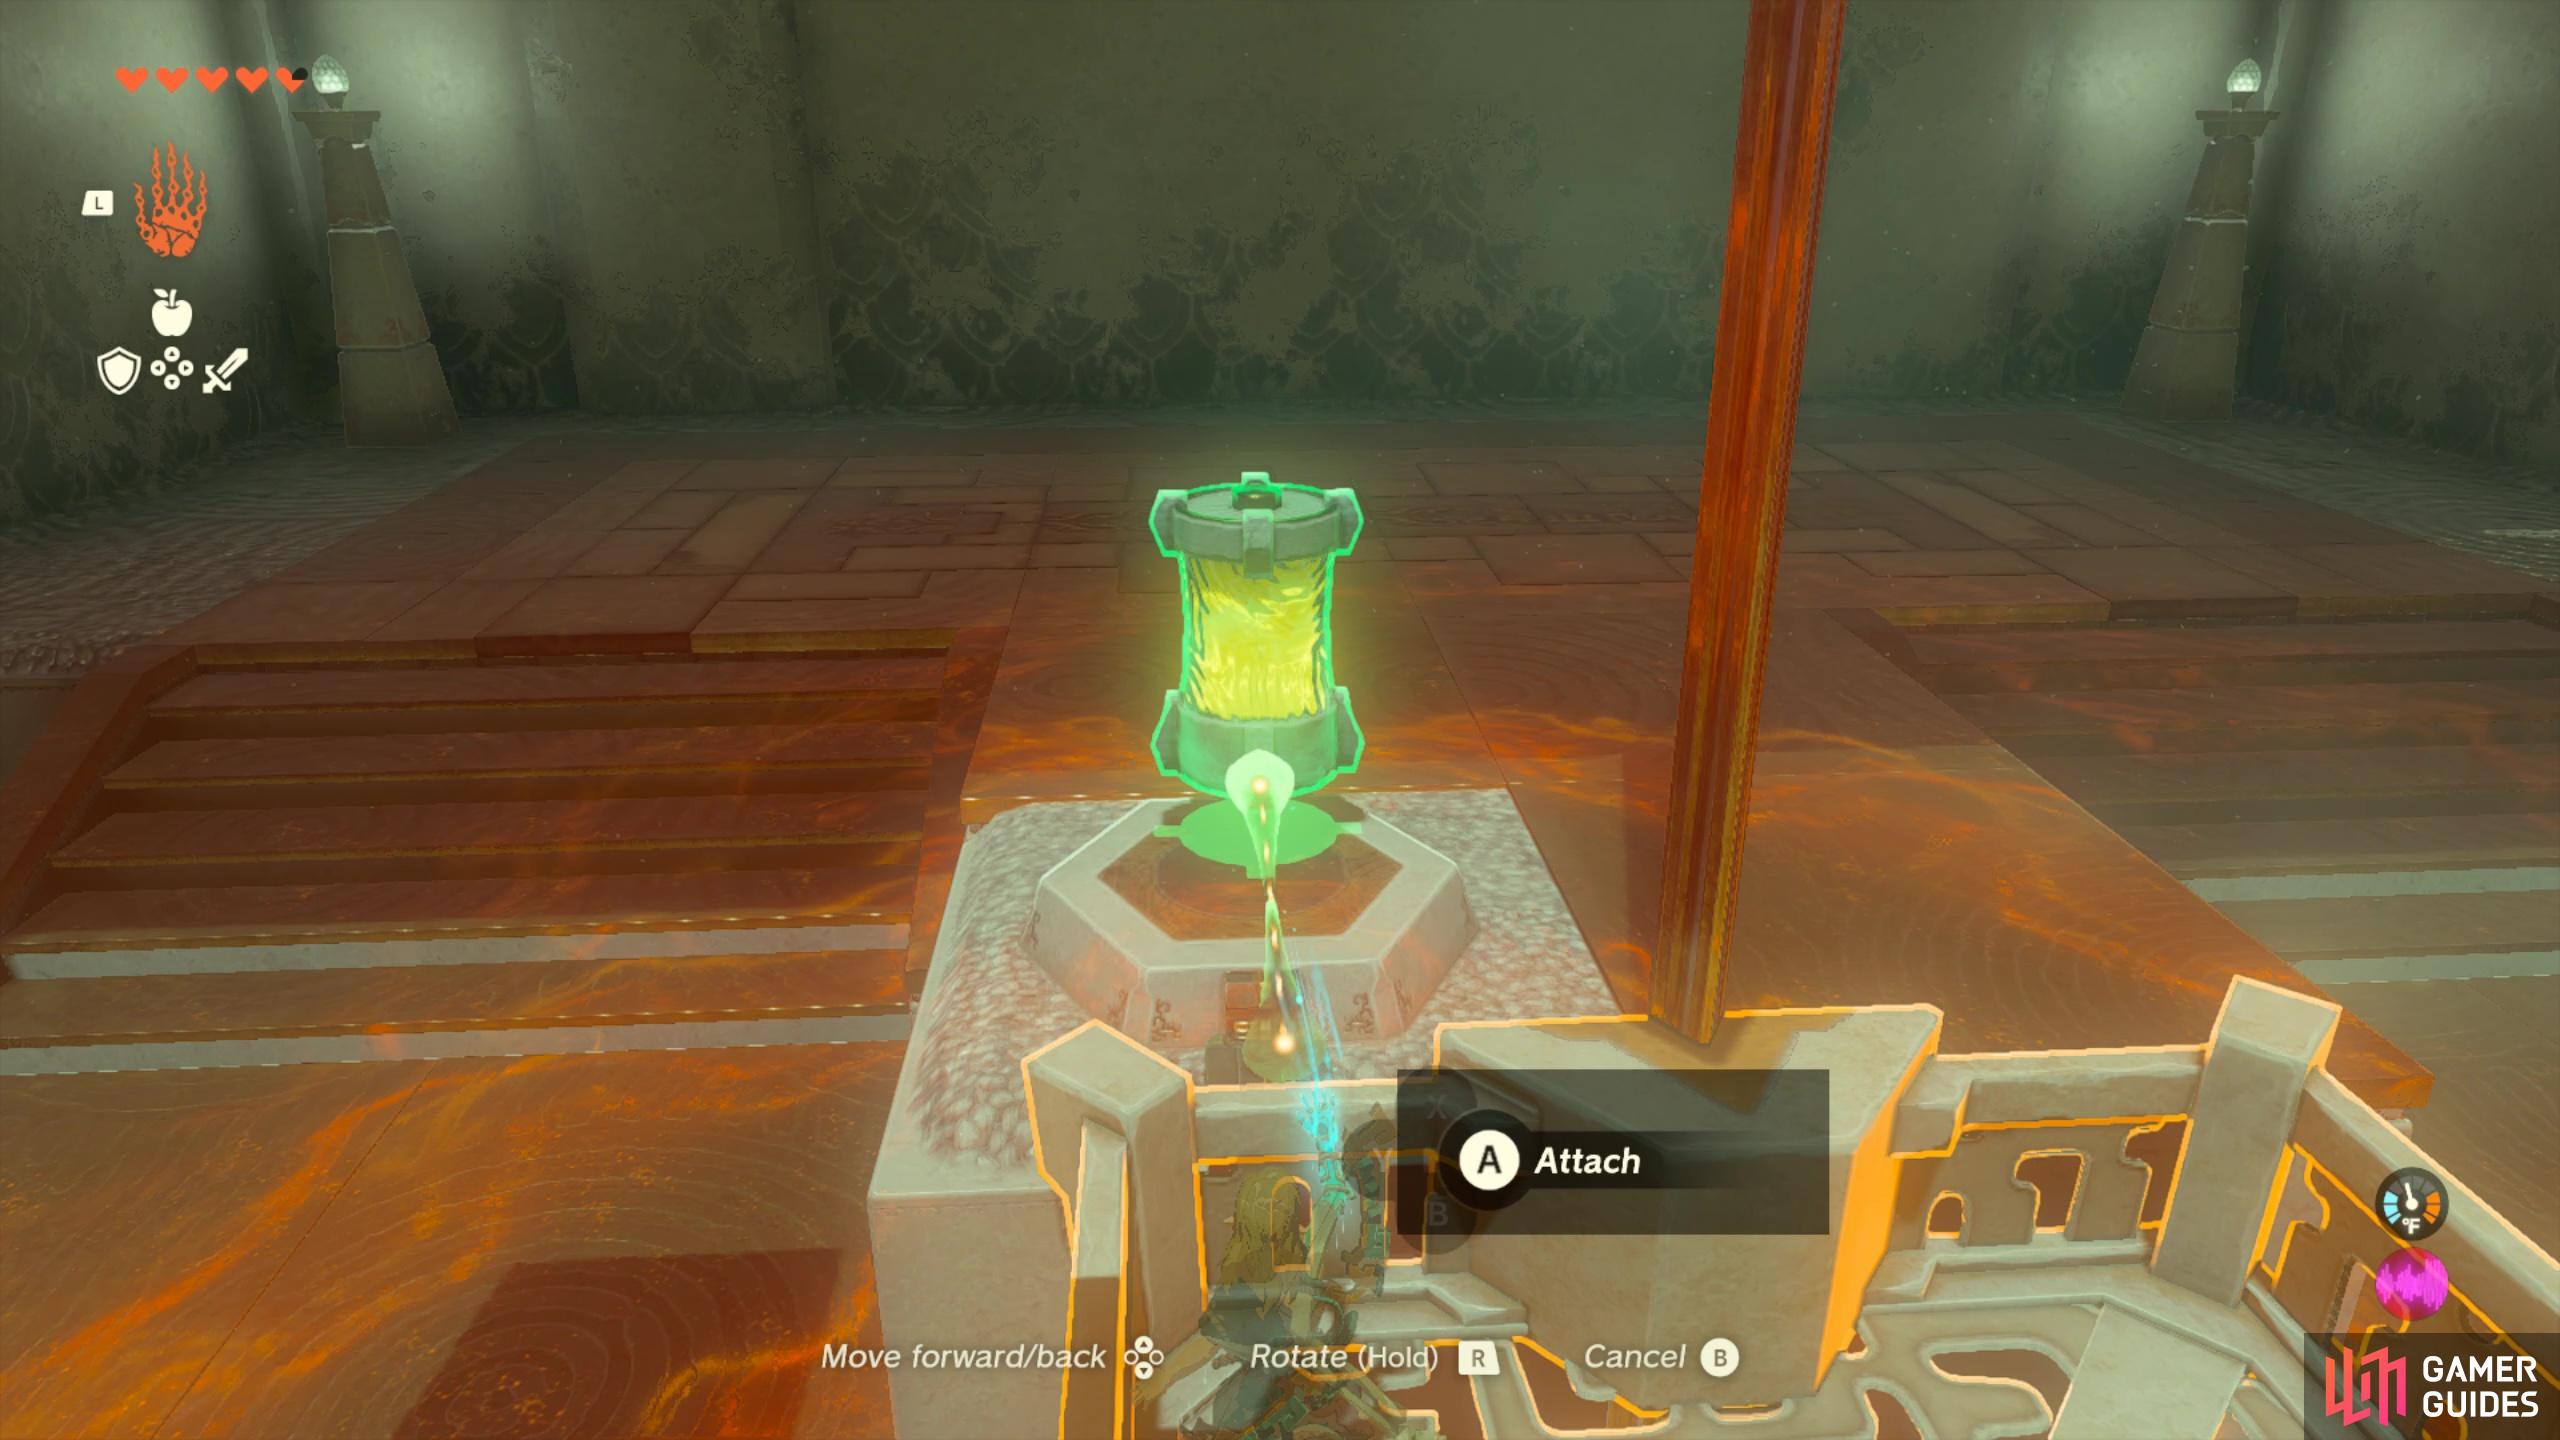 Use the recharged battery to power the platform that’ll take you to the end of the shrine. 